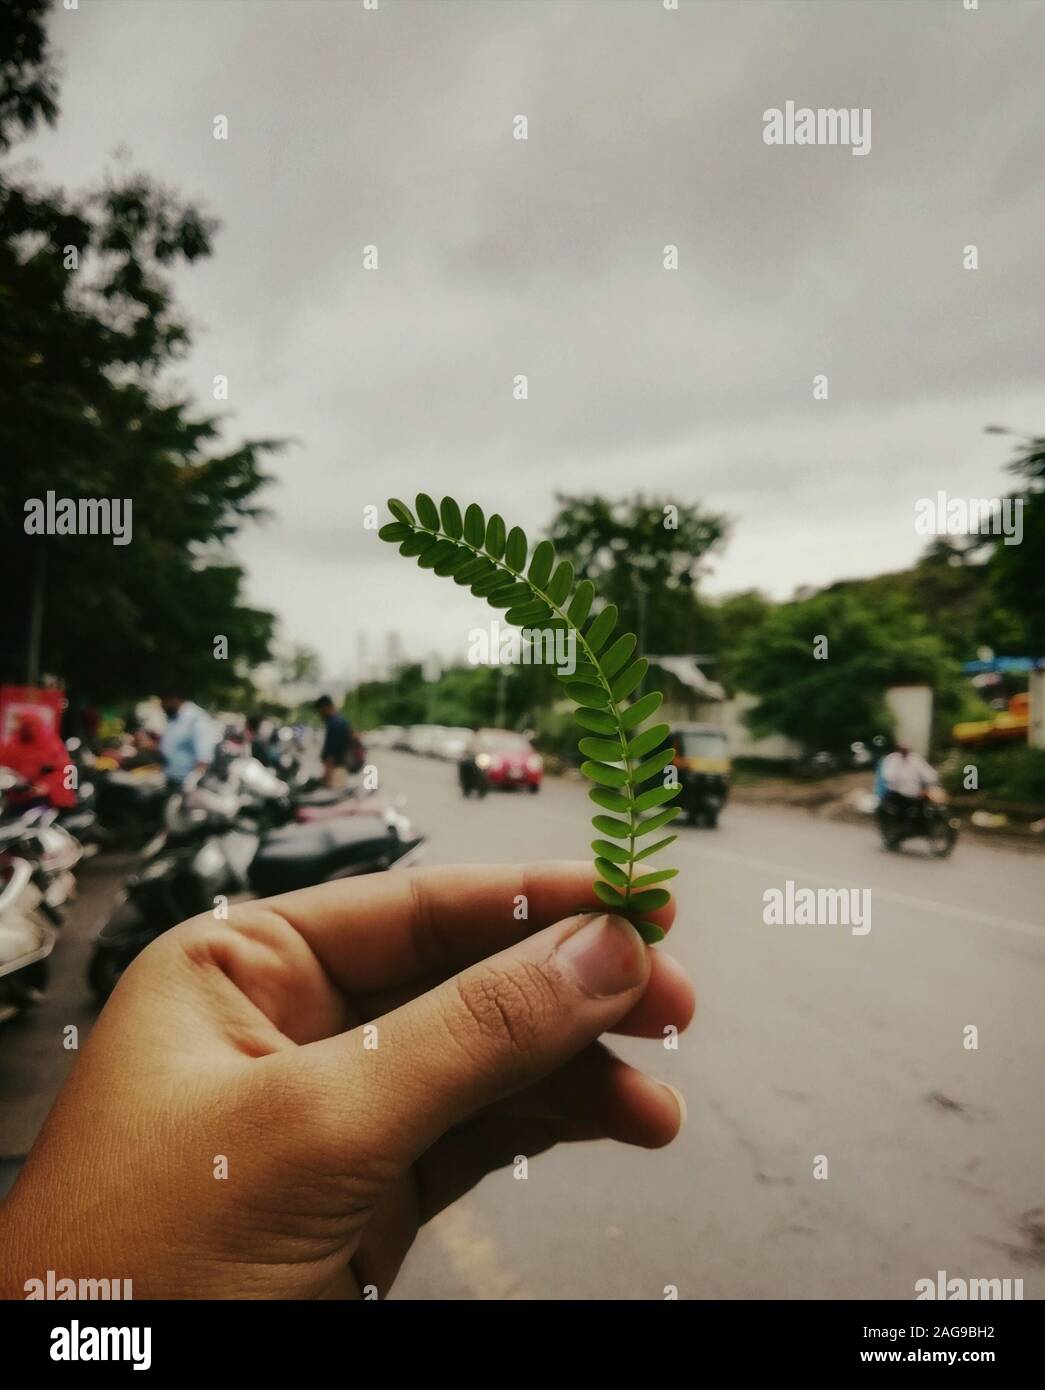 Selective focus shot of a person holding an Albizia julibrissin leaf in a street full of bikers Stock Photo